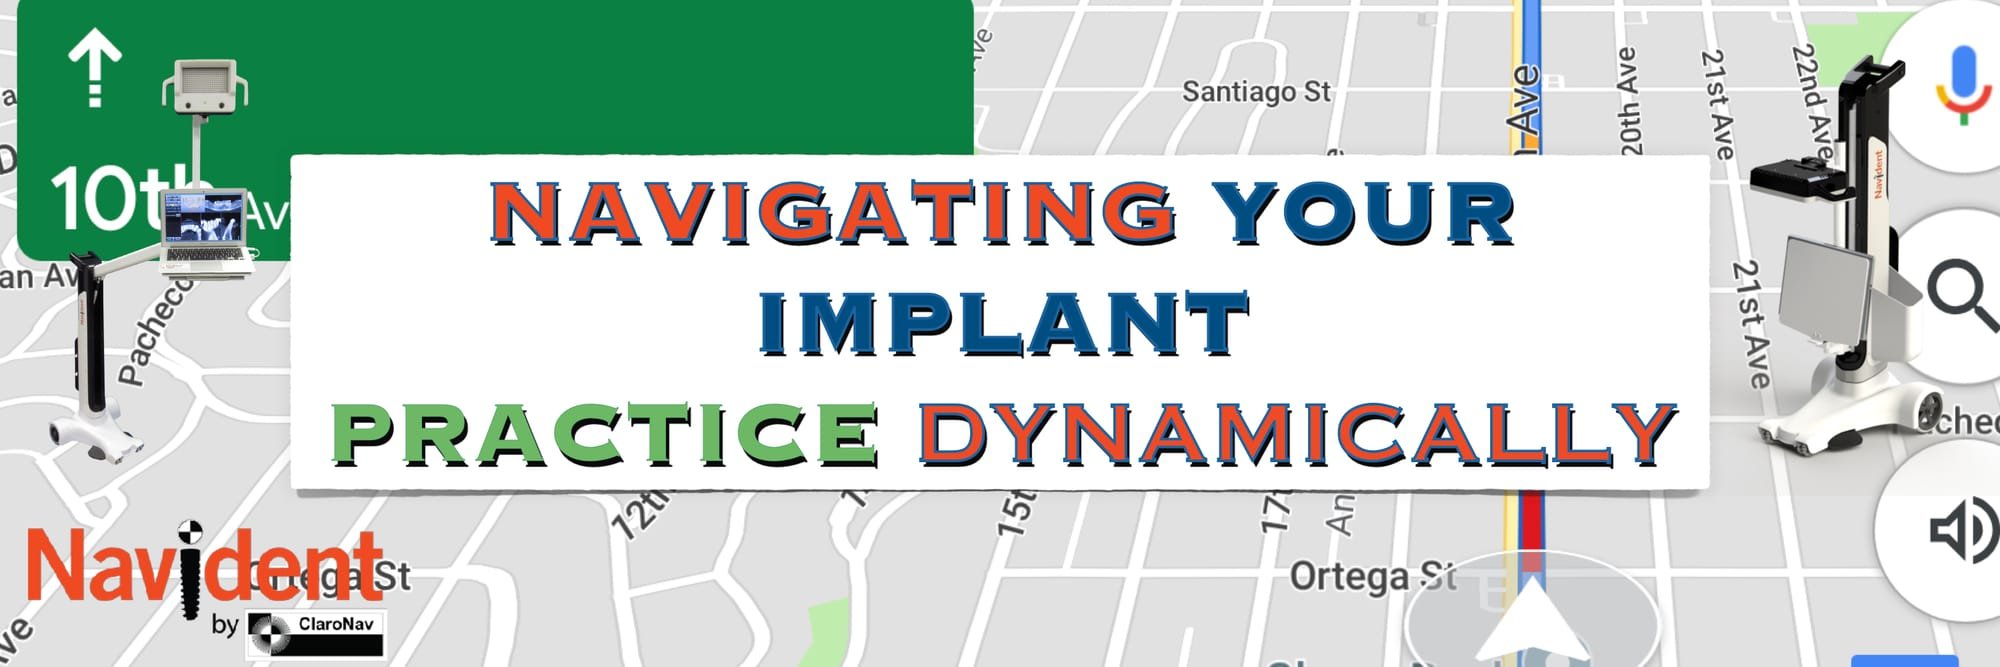 Navigating your implant practice